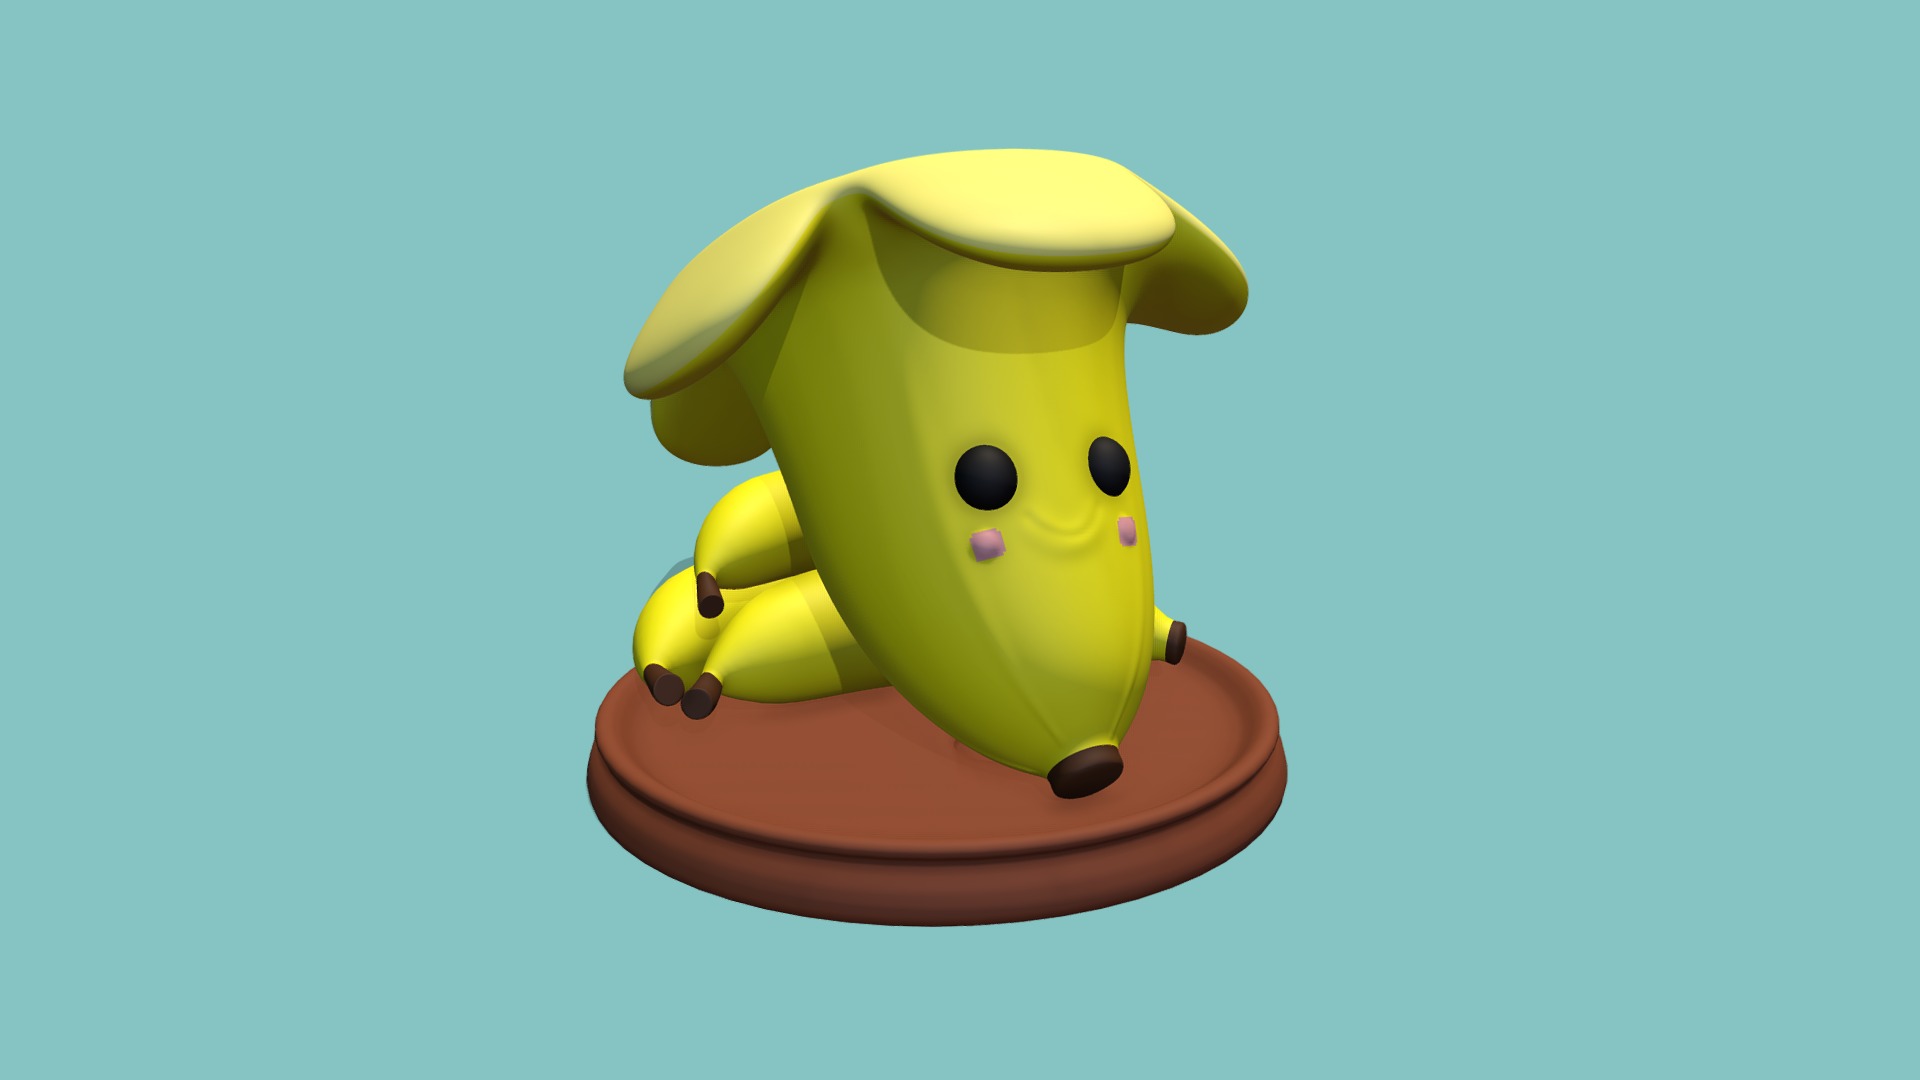 3D model Banajar Printable - This is a 3D model of the Banajar Printable. The 3D model is about a yellow toy on a stand.